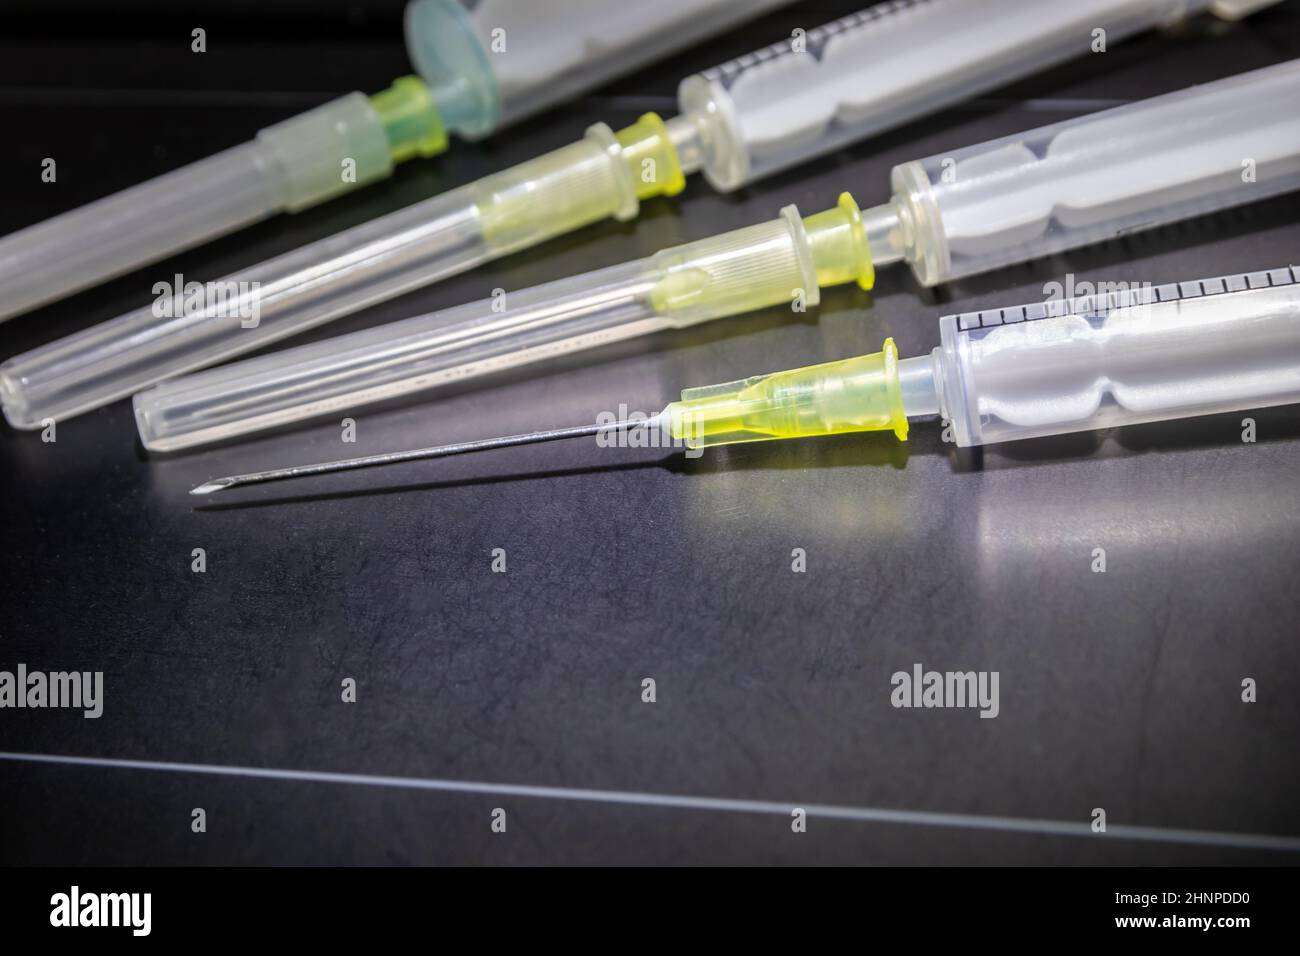 New medical vaccines ready for injection with syringe and vaccine to inject the cure for immunization into ill and weak patients to heal their suffers and illnesses supported corona health care system Stock Photo